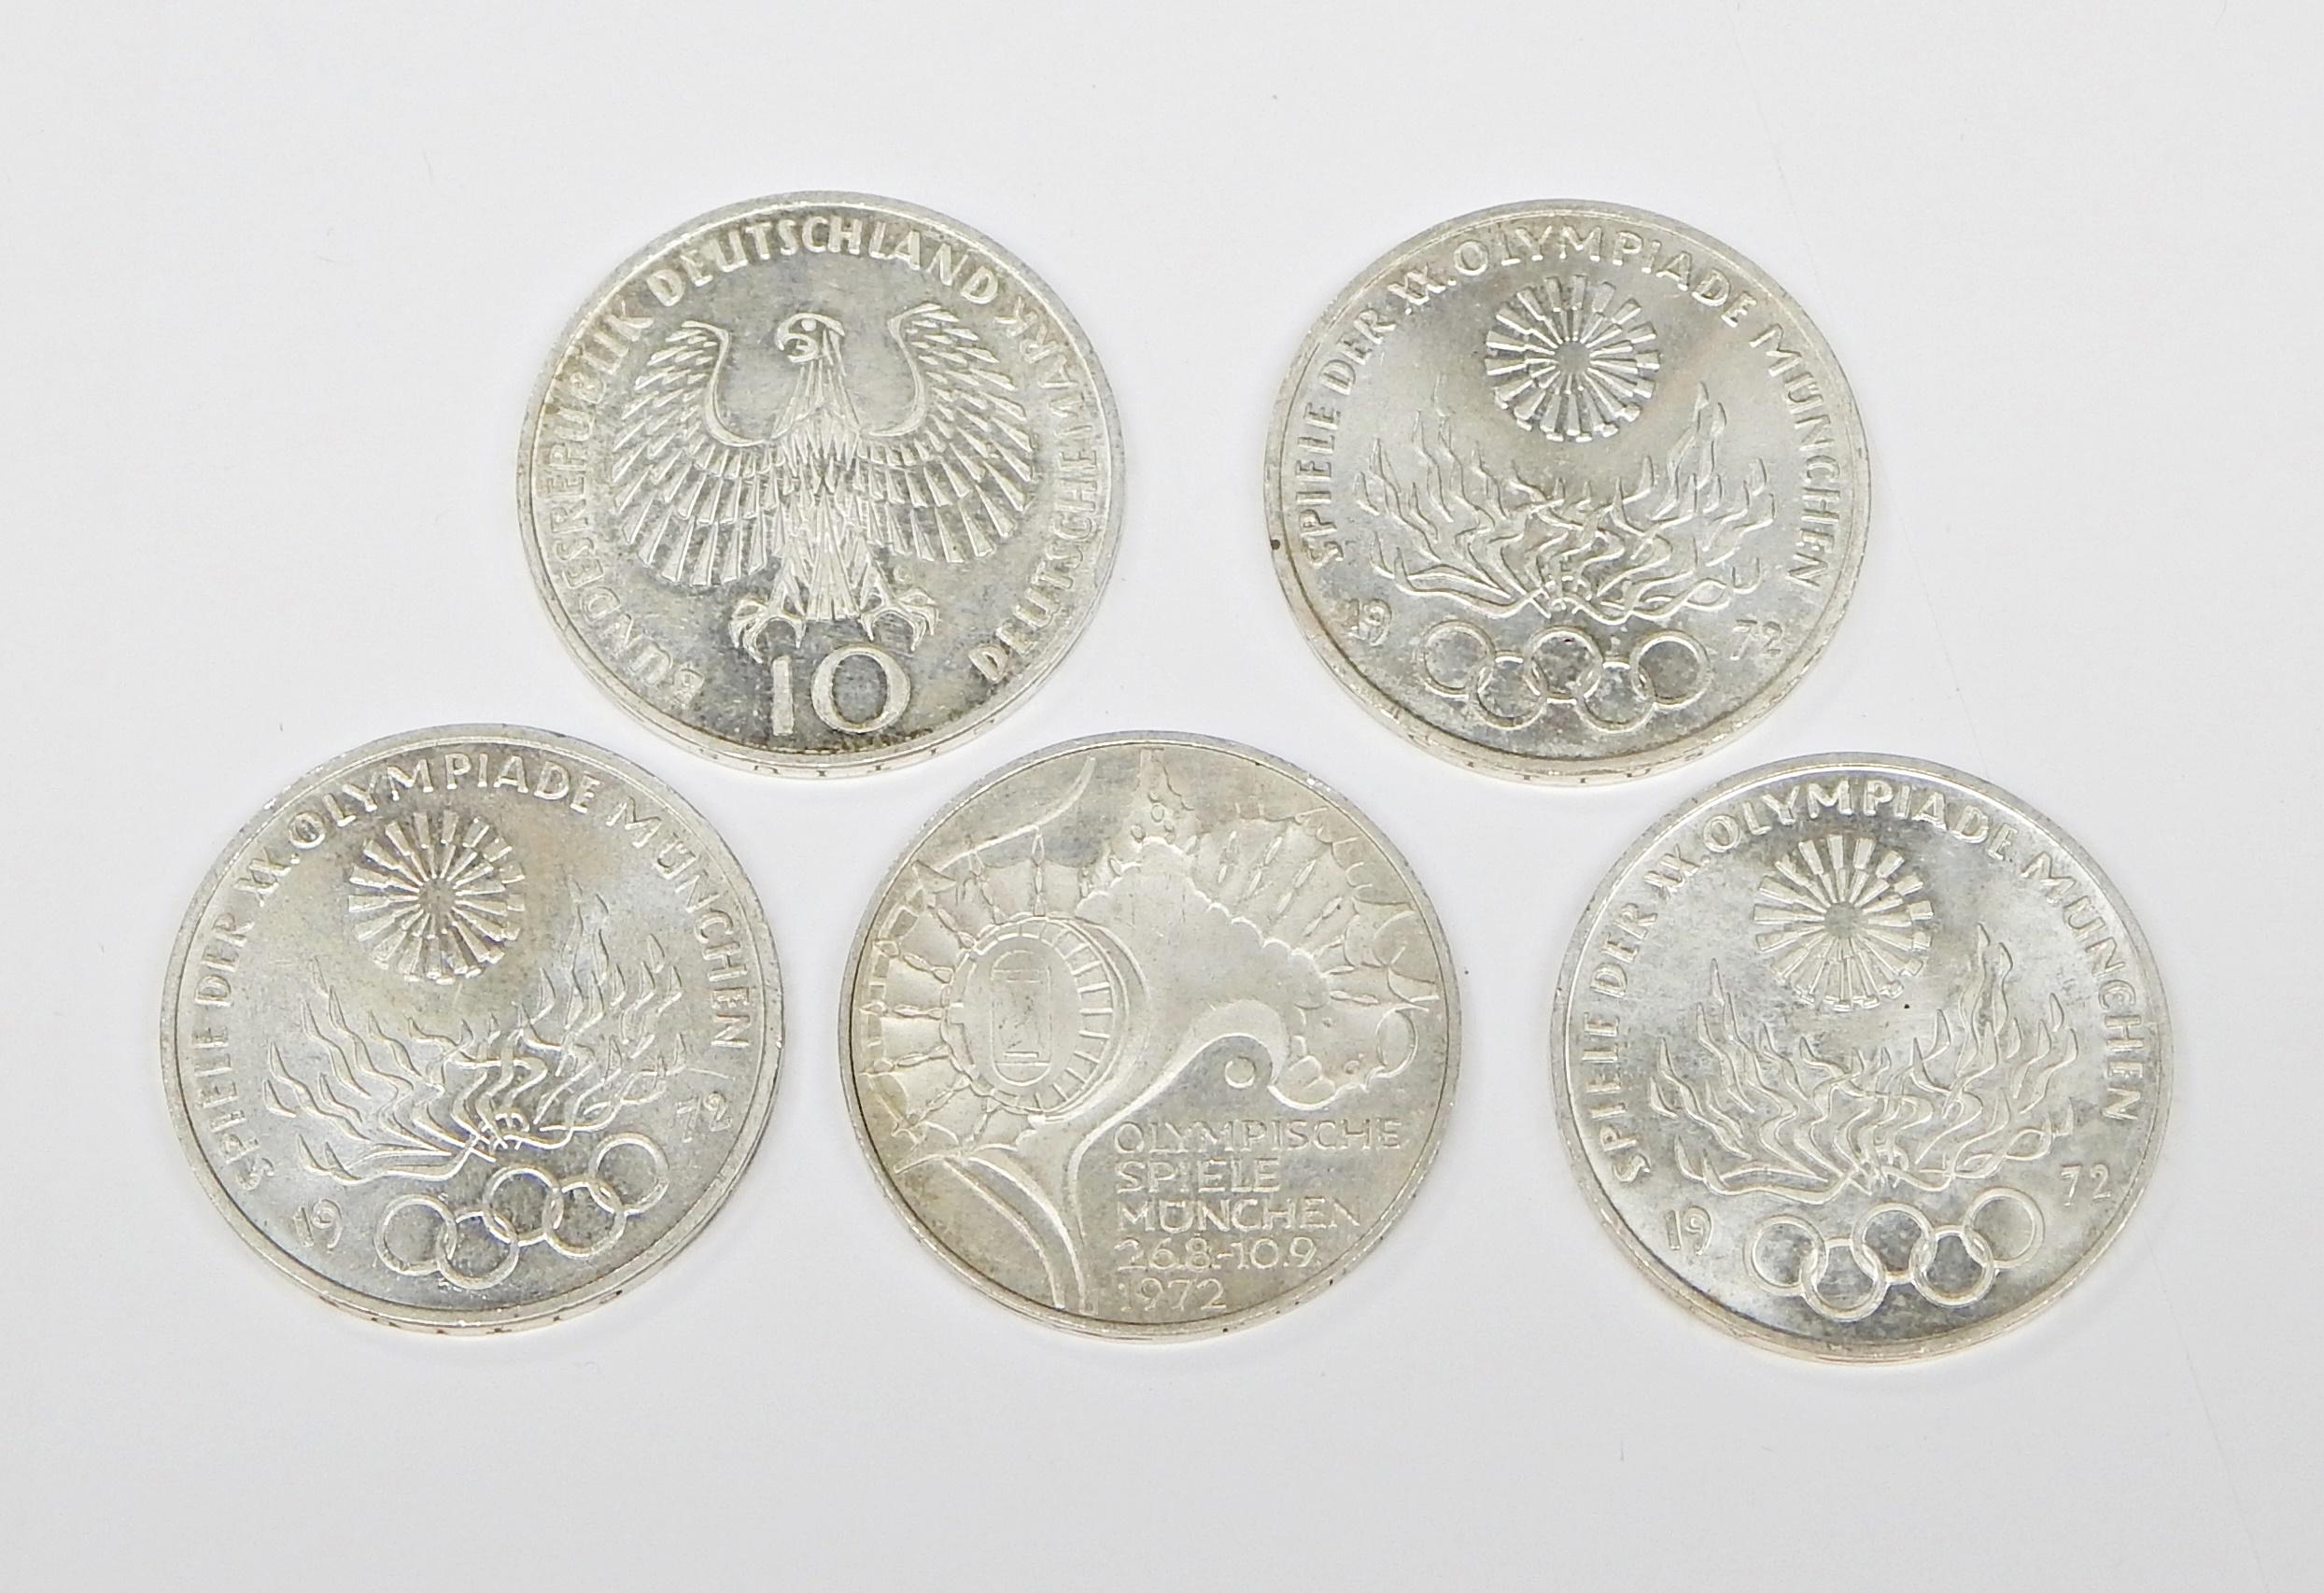 GERMANY - 5 SILVER 1970's OLYMPIC 10 MARK COINS - 1.56 TROY OZ ACTUAL SILVER WEIGHT